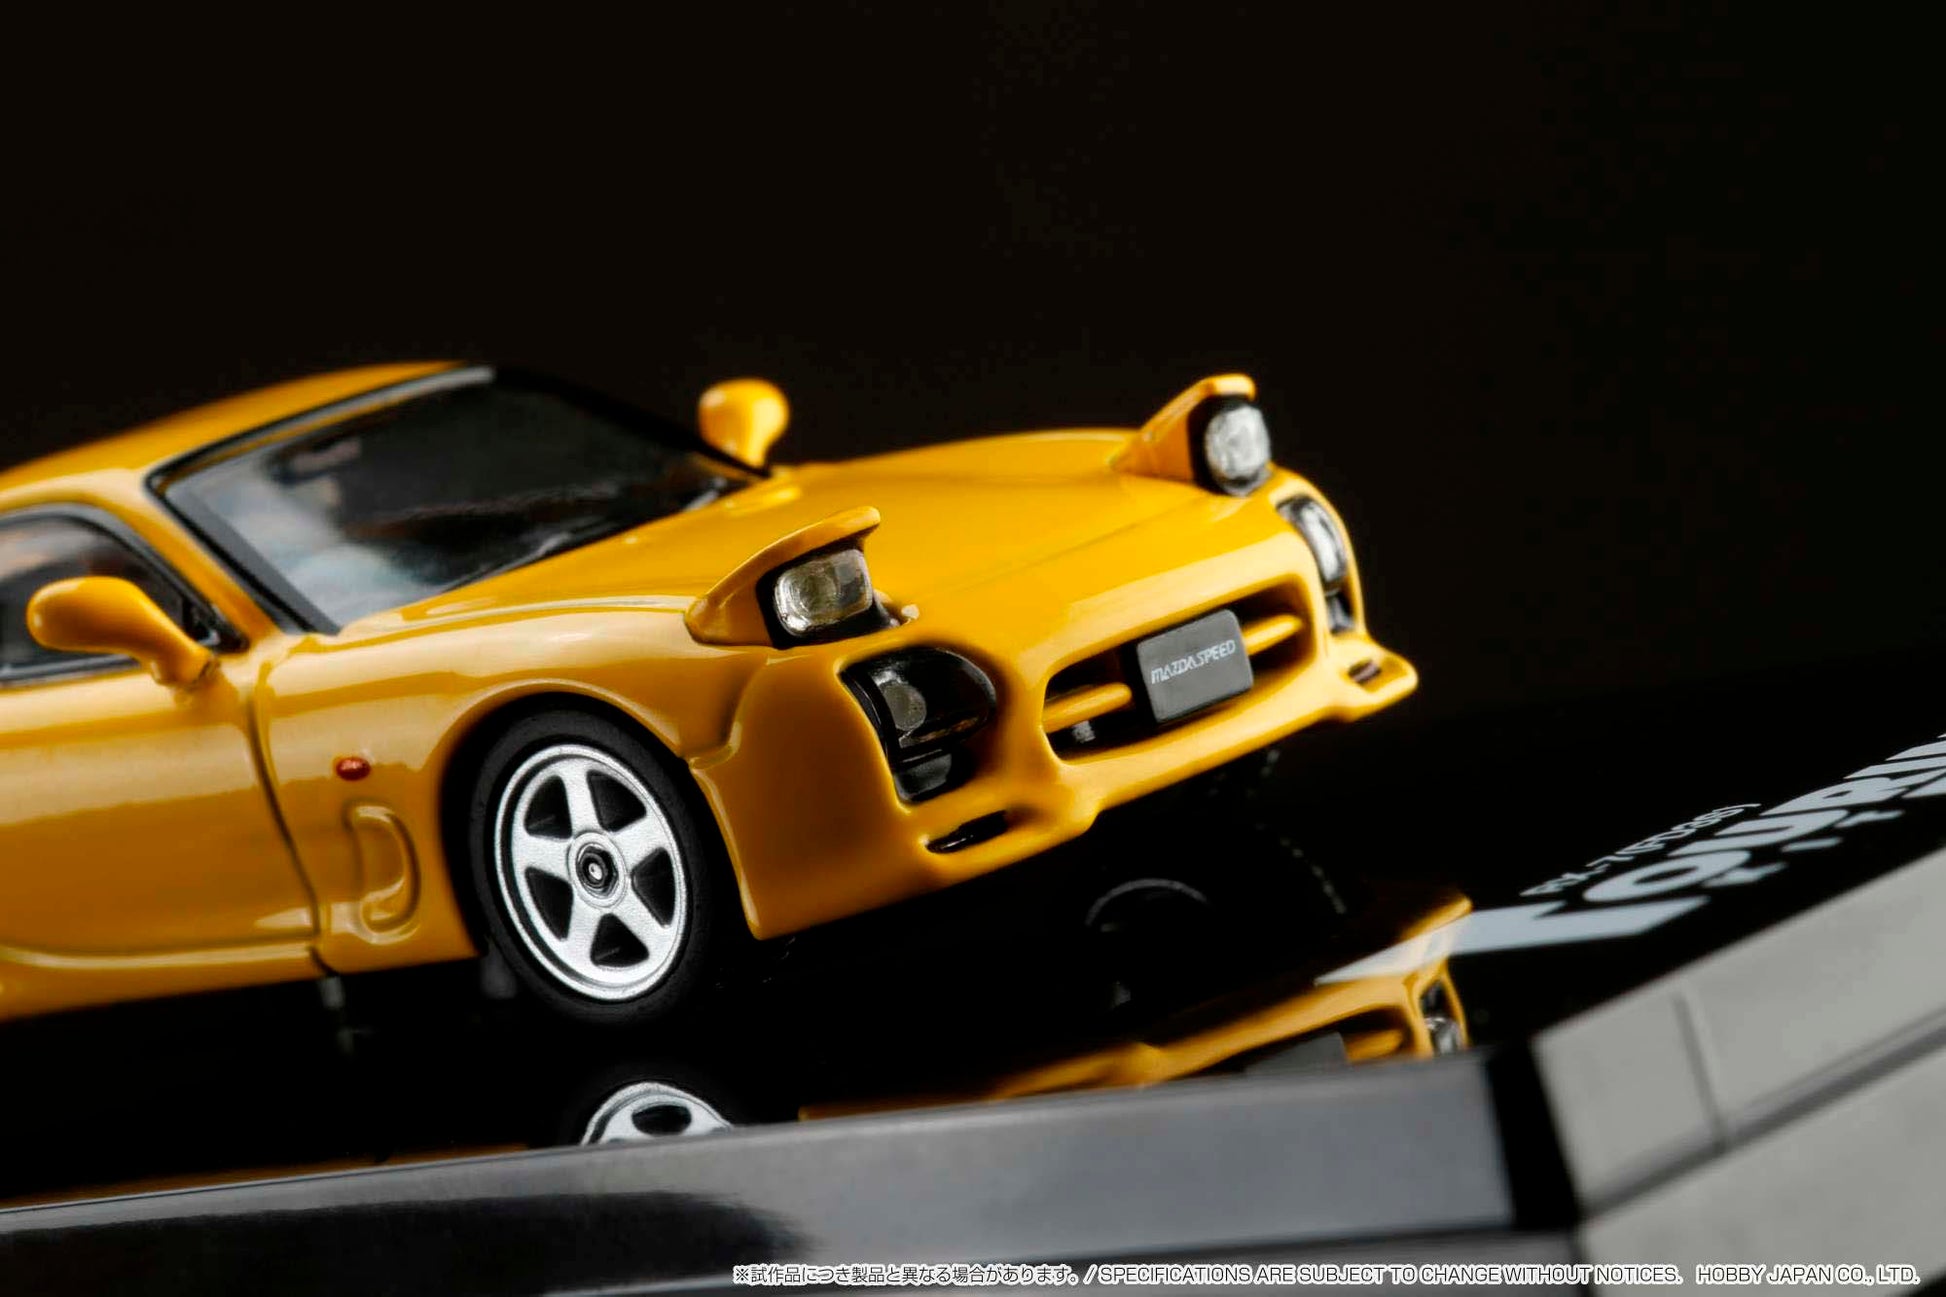 Hobby Japan
1/64 enfini RX-7 FD3S (A-Spec.) Yellow Hobby Japan